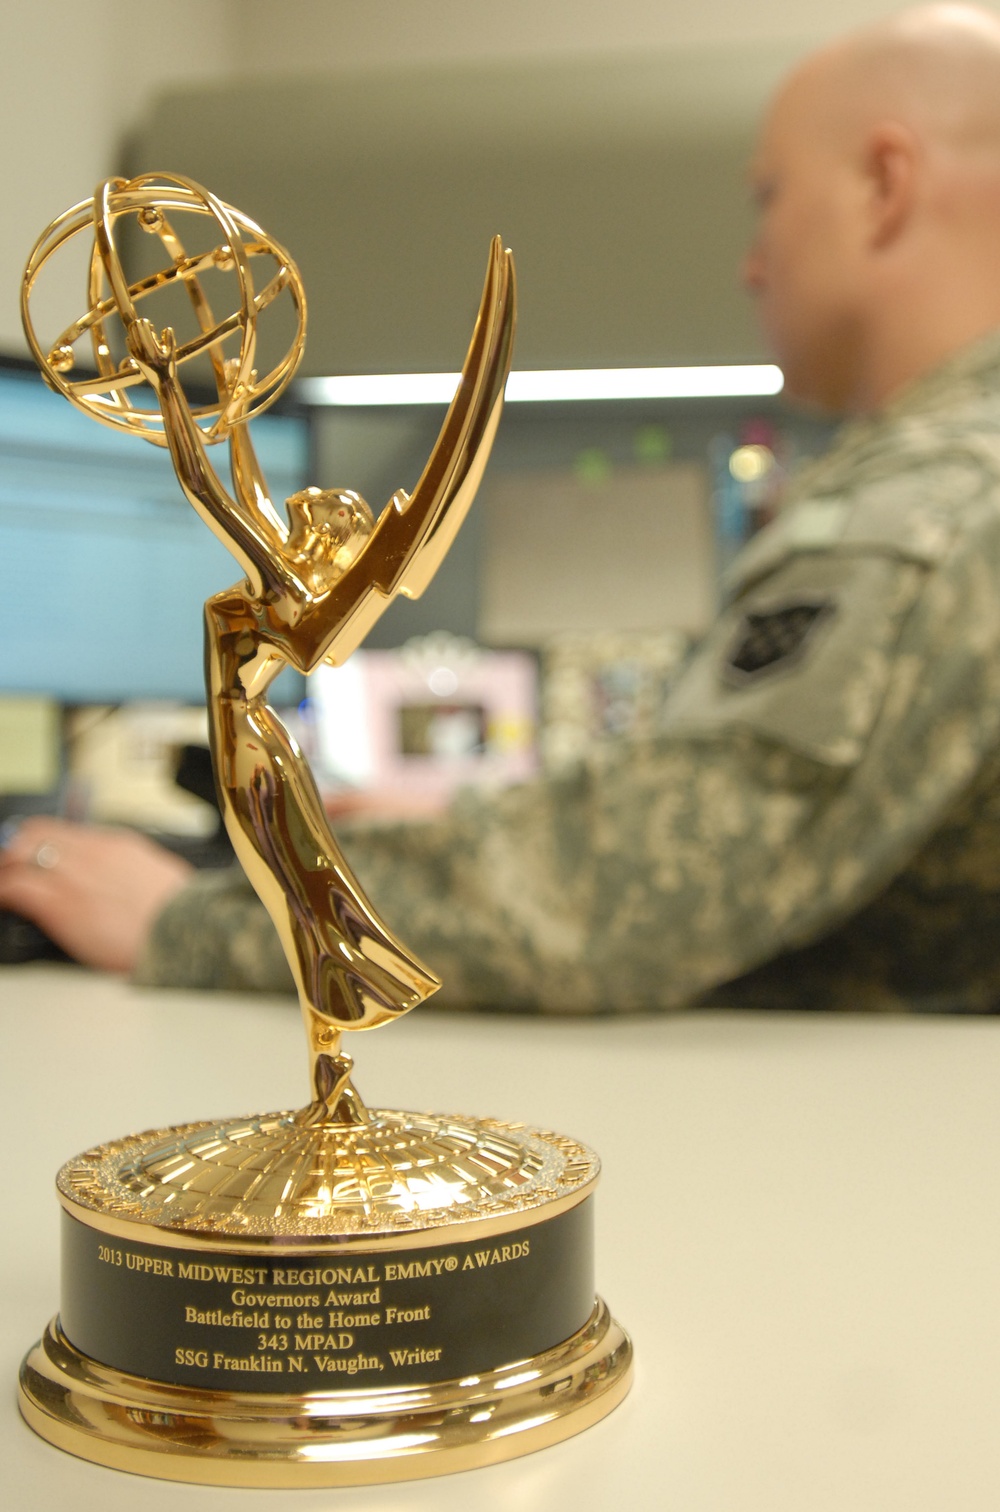 Army Reserve Soldier receives Emmy Award